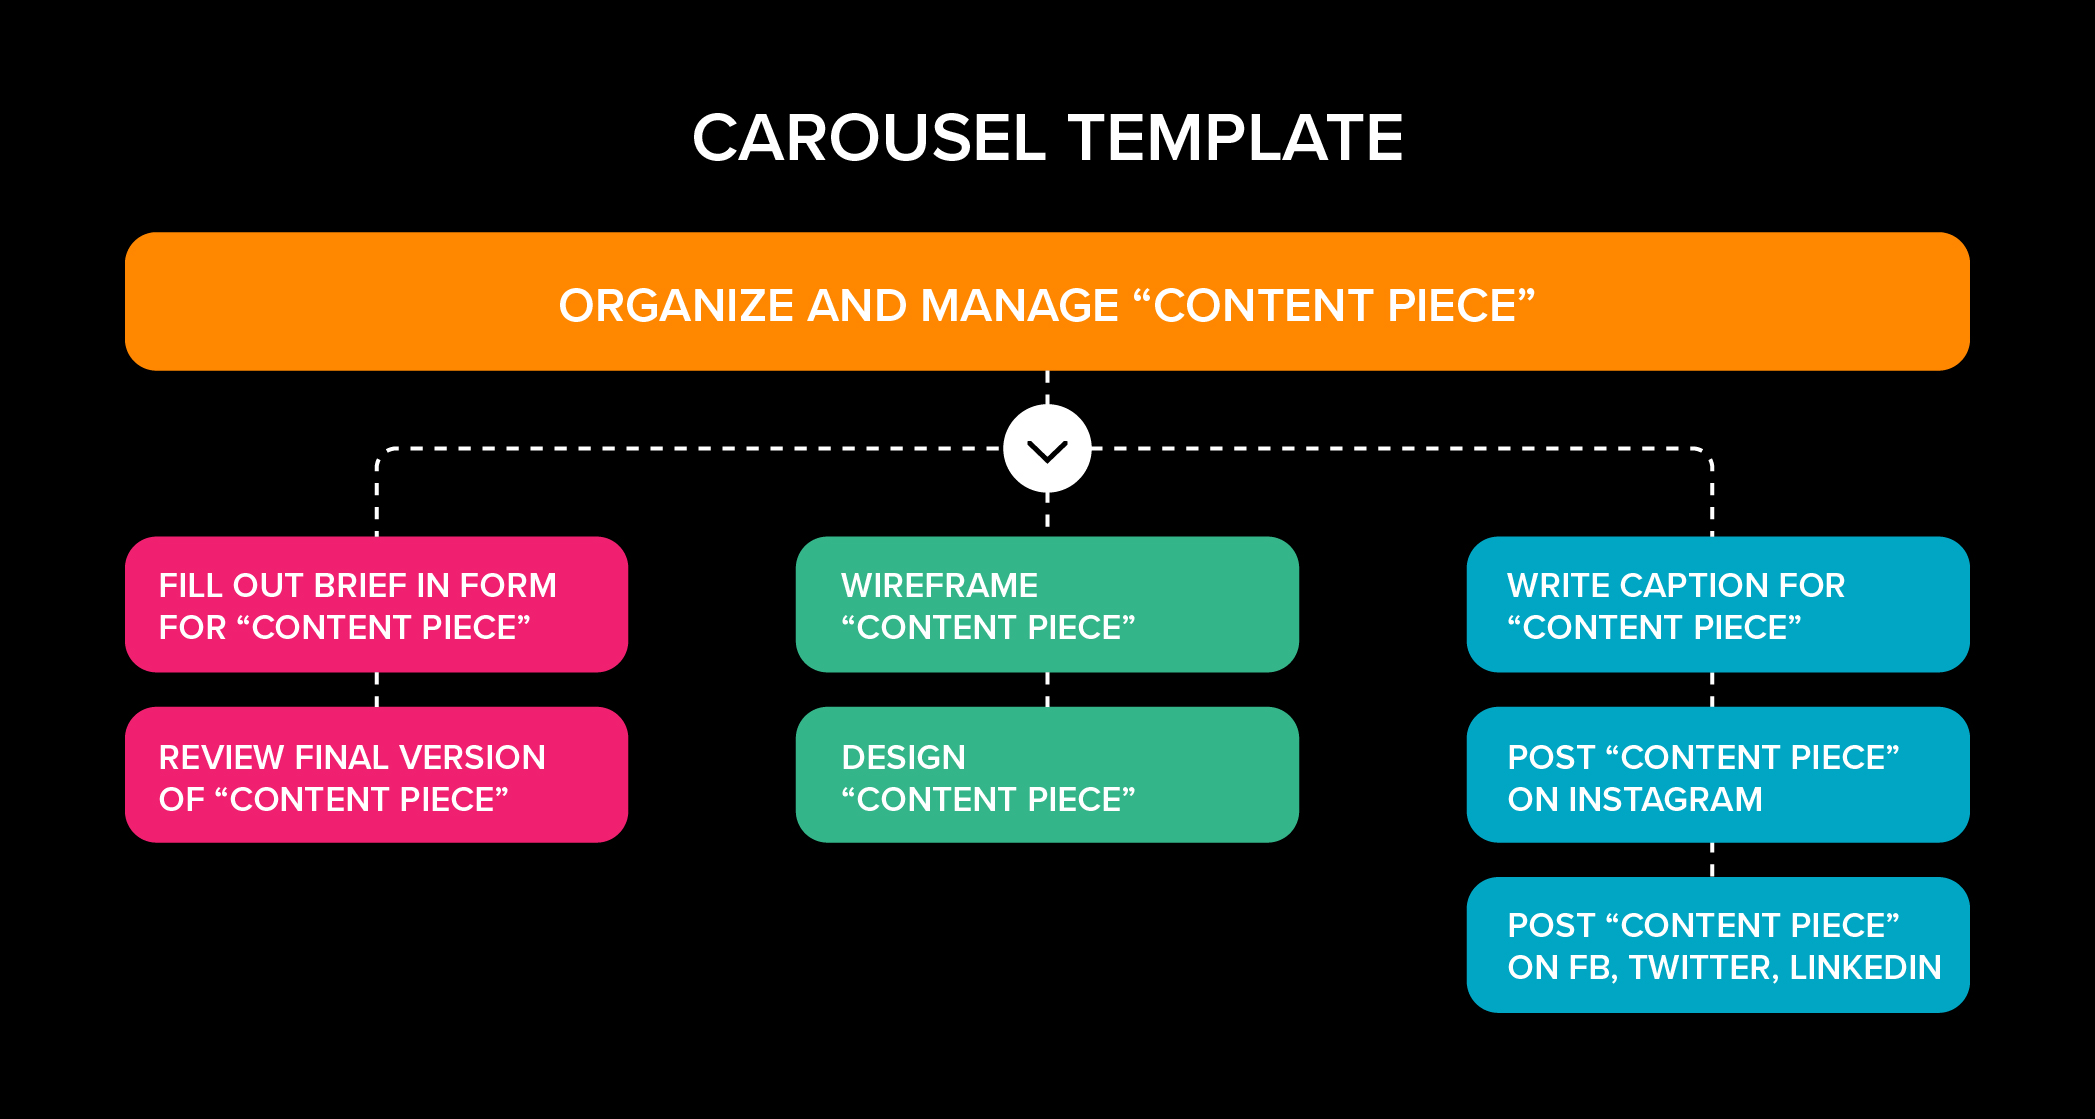 An example workflow showing the tasks that go into creating a social media carousel.